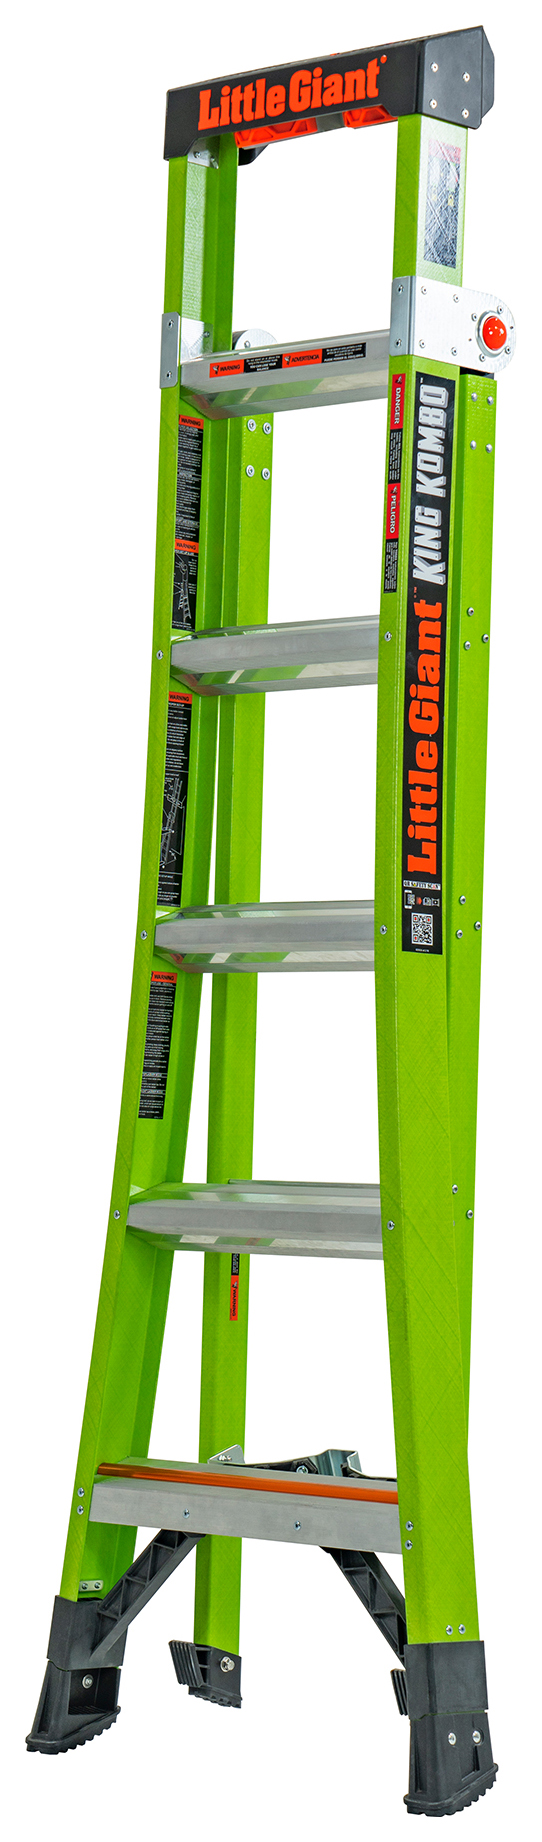 Image of Little Giant 6 Tread King Kombo™ Industrial Extension Ladder